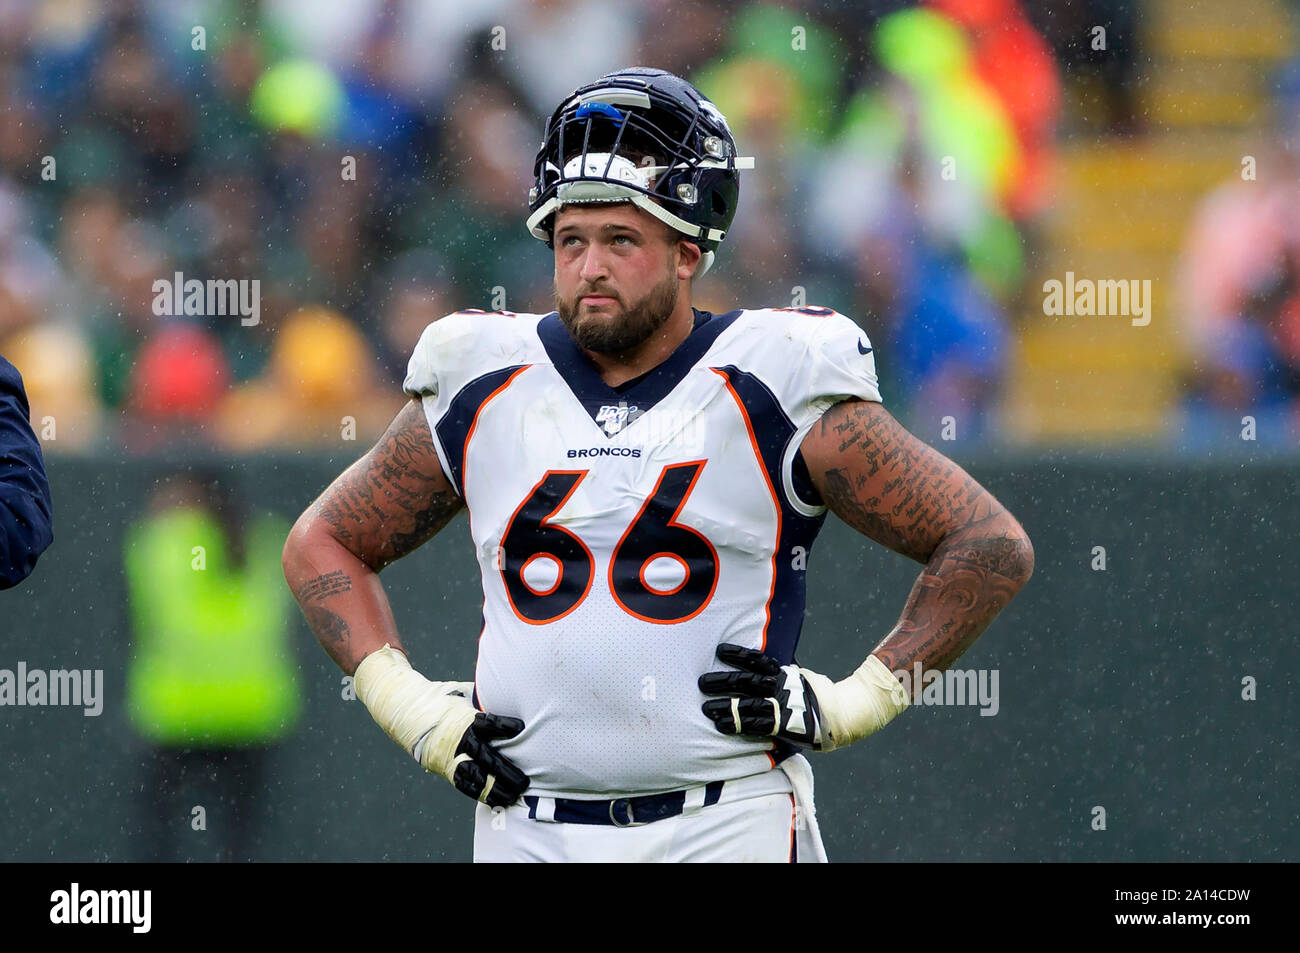 Green Bay, WI, USA. 22nd Sep, 2019. Denver Broncos offensive tackle Dalton  Risner #66 in the rain during the NFL Football game between the Denver  Broncos and the Green Bay Packers at